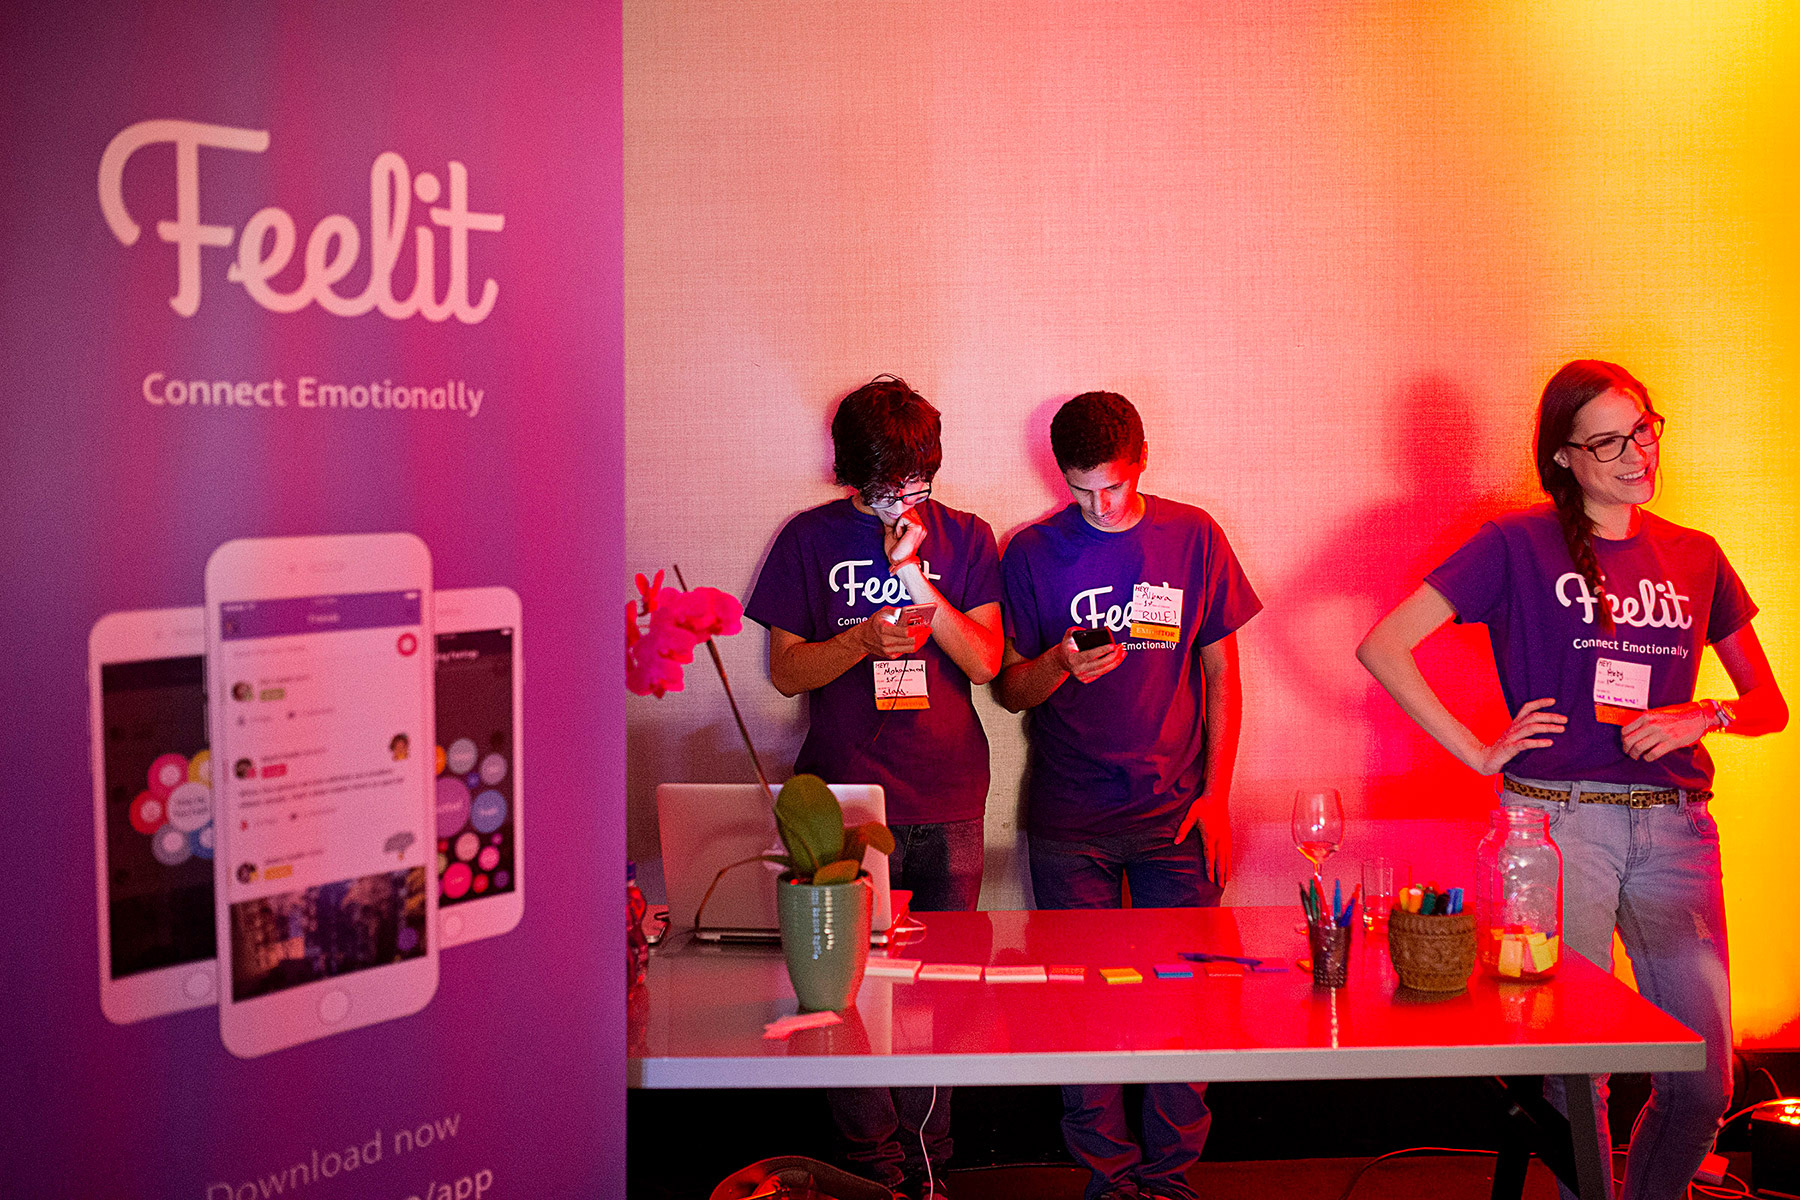 Mohammed Alkadi, Albara Hakami and Abby Wischnia, seen left to right, host a booth for their company Feelit, a social app to help people express their feelings and emotions, during the Startup and Tech Mixer at the W Hotel in San Francisco, California in March 2015. The networking event, which drew hundreds of people from the tech industry hoping to make connections, was for a time, held every few months.